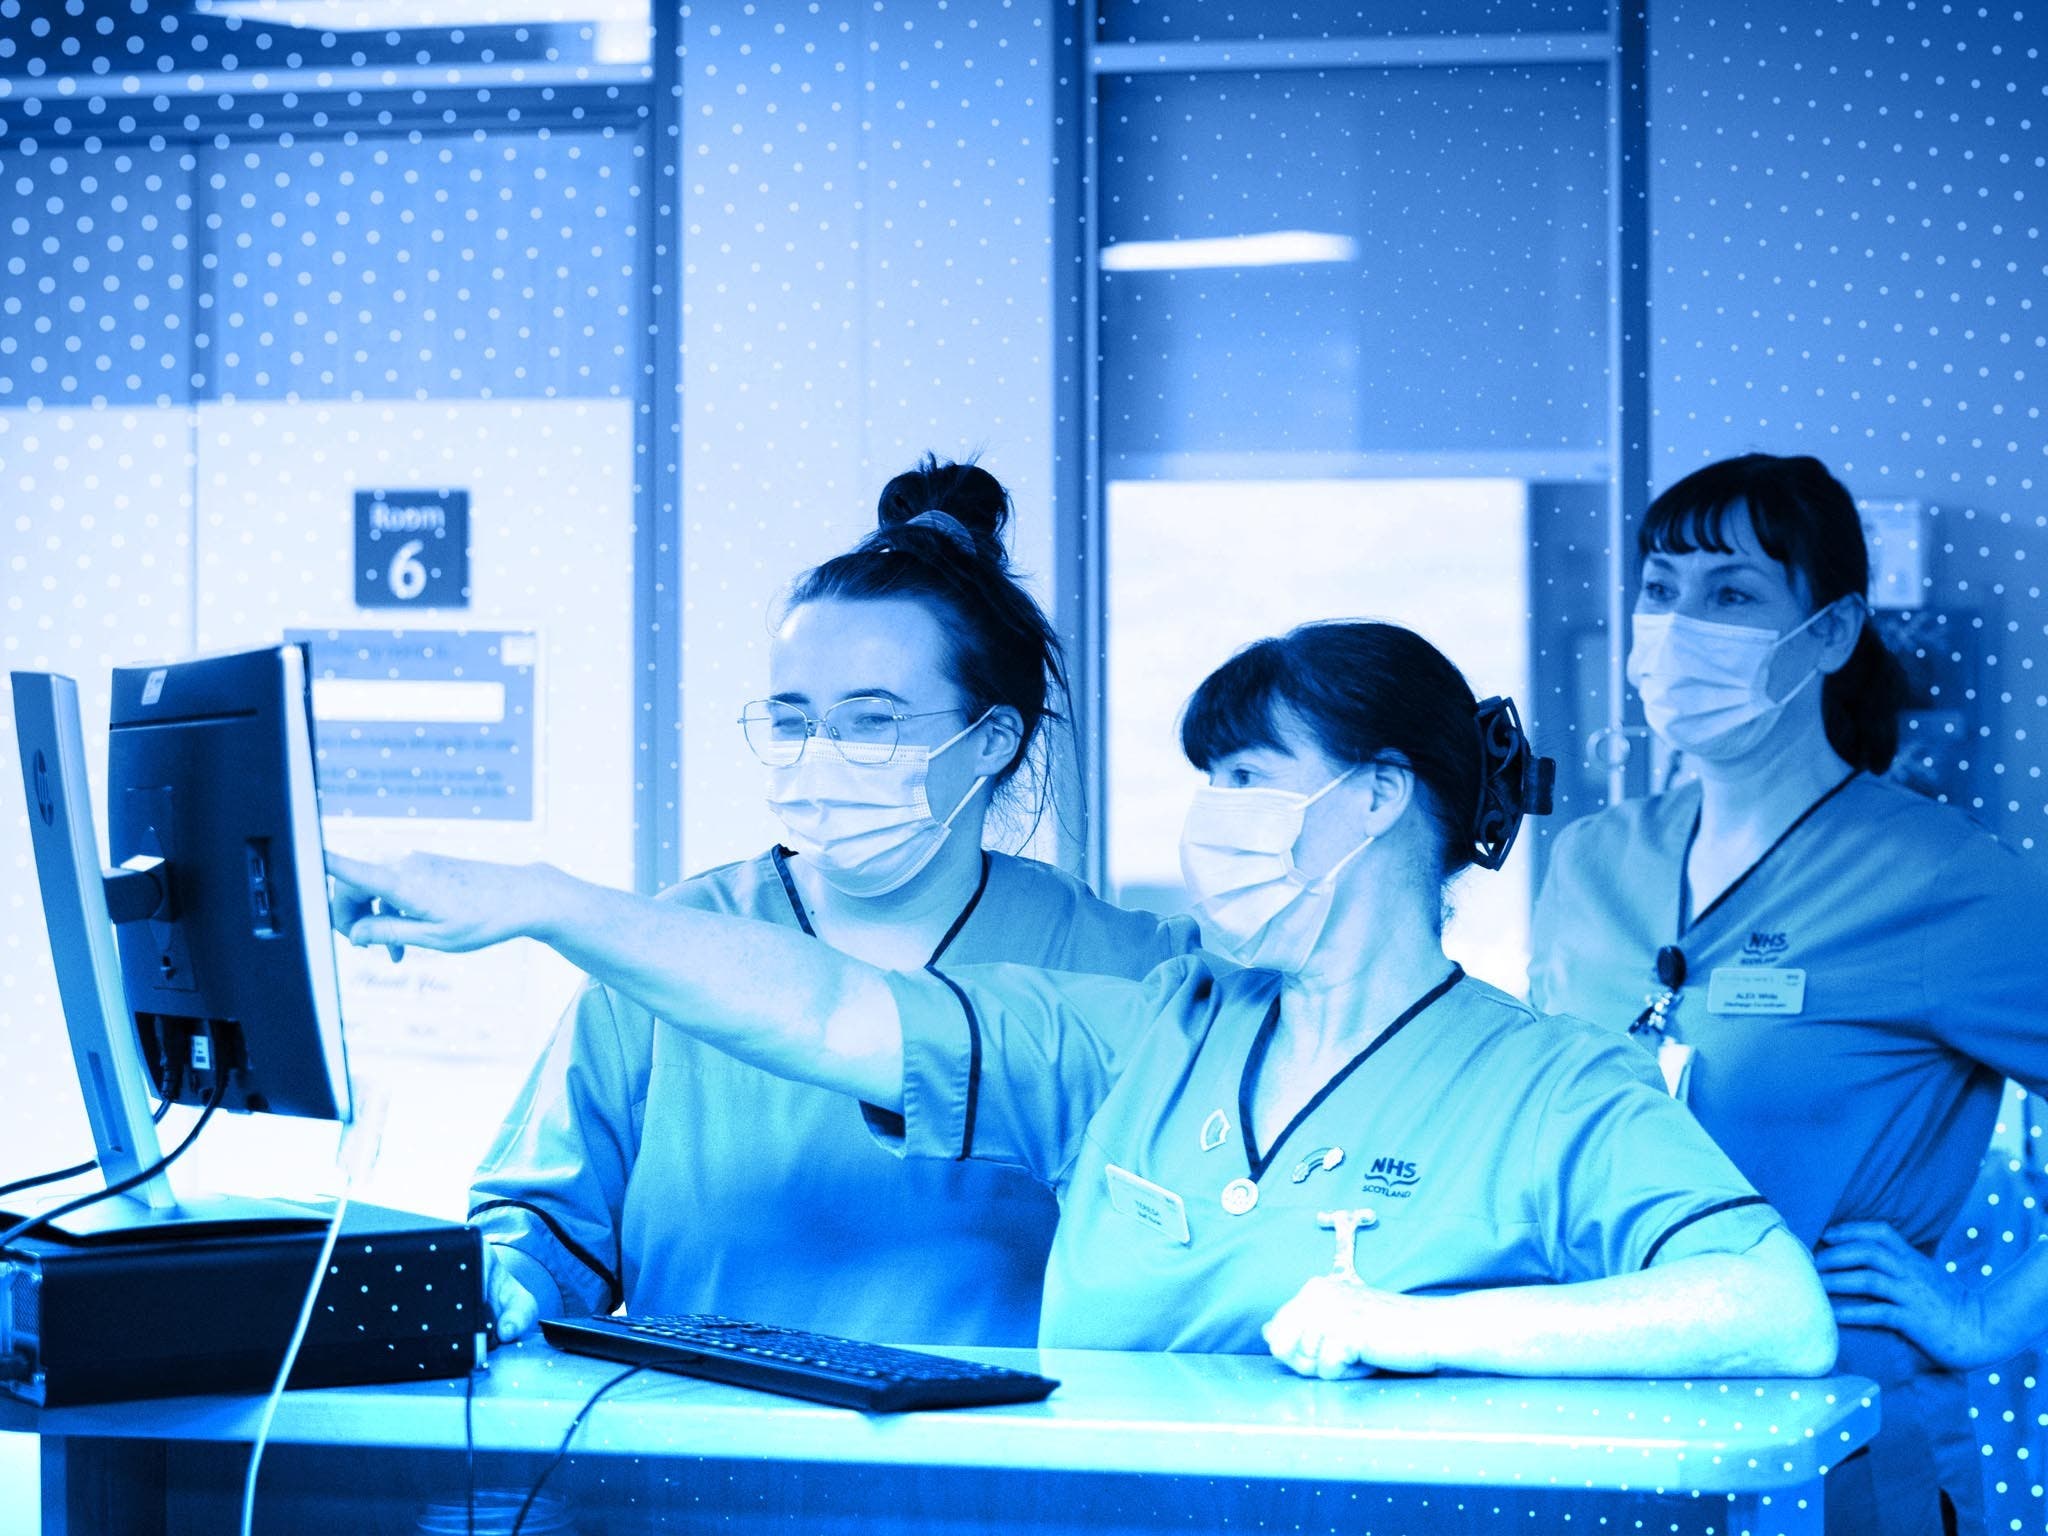 Staffing solutions staff are key to NHS recovery